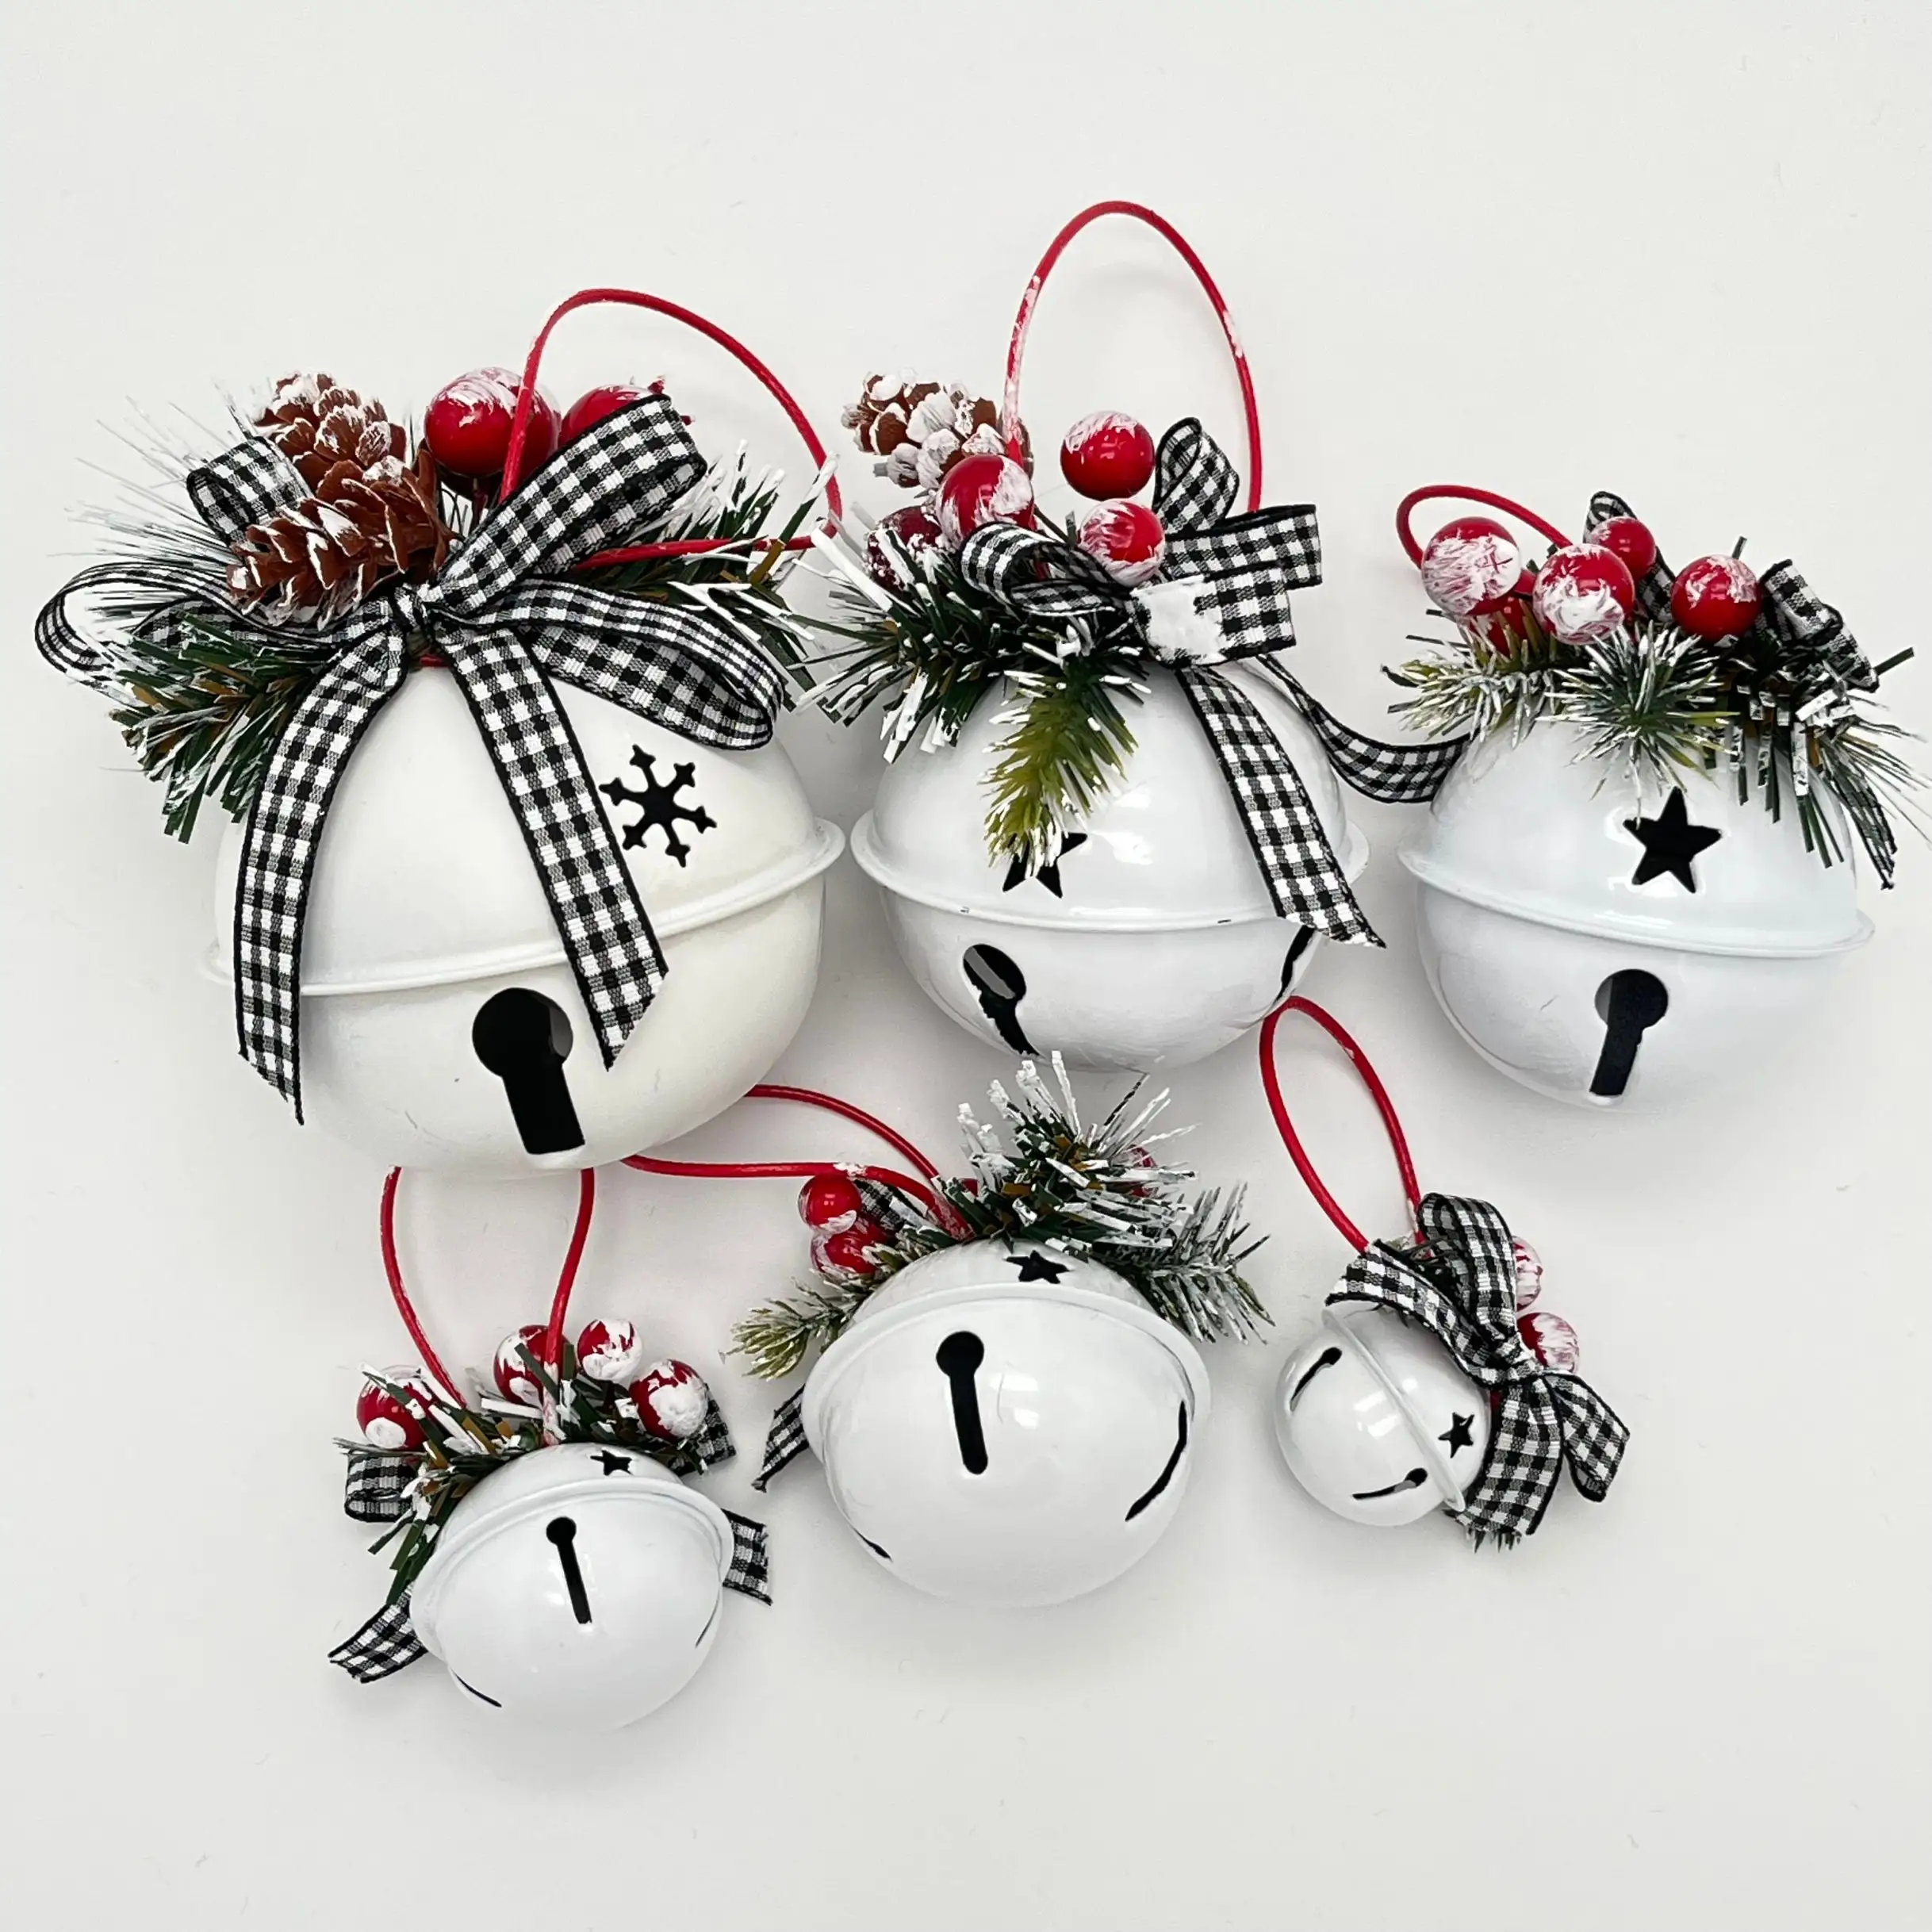 Factory Supplier New Brand Multicolor christmas hanging bell with pinecone red berry Ornaments